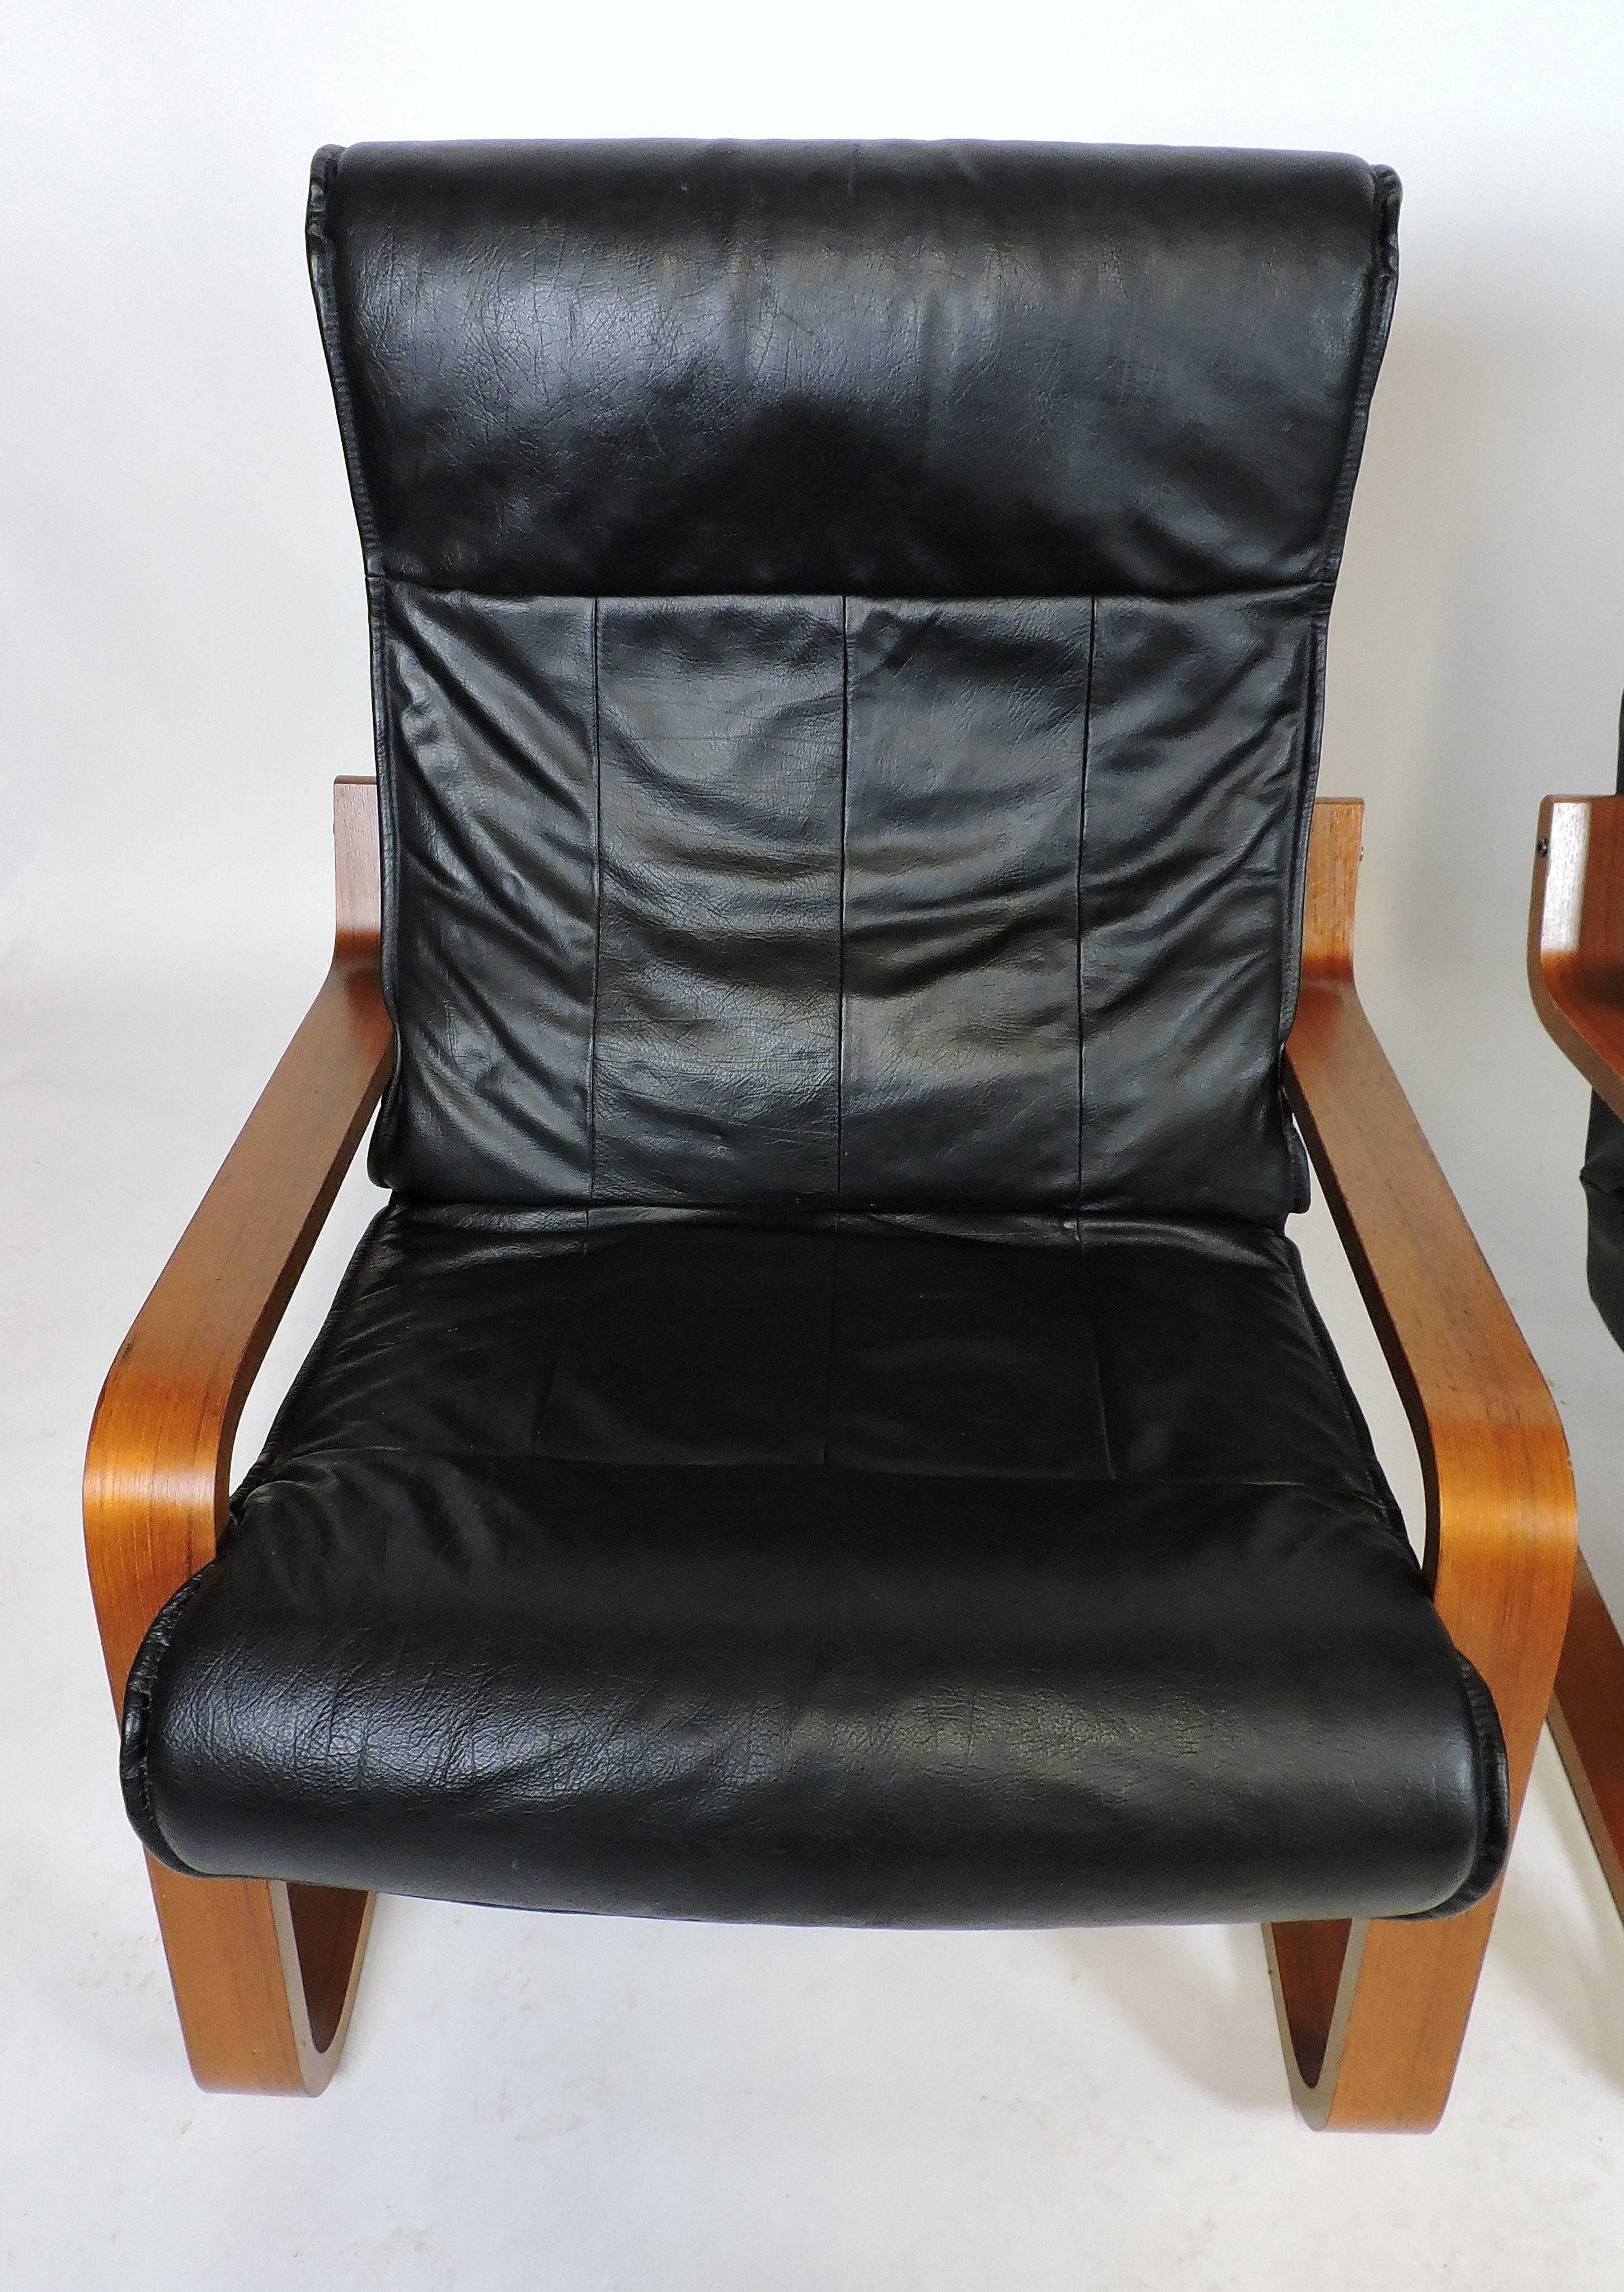 Late 20th Century Pair of Danish Modern Alvar Aalto Style Cantilevered Teak Leather Lounge Chairs